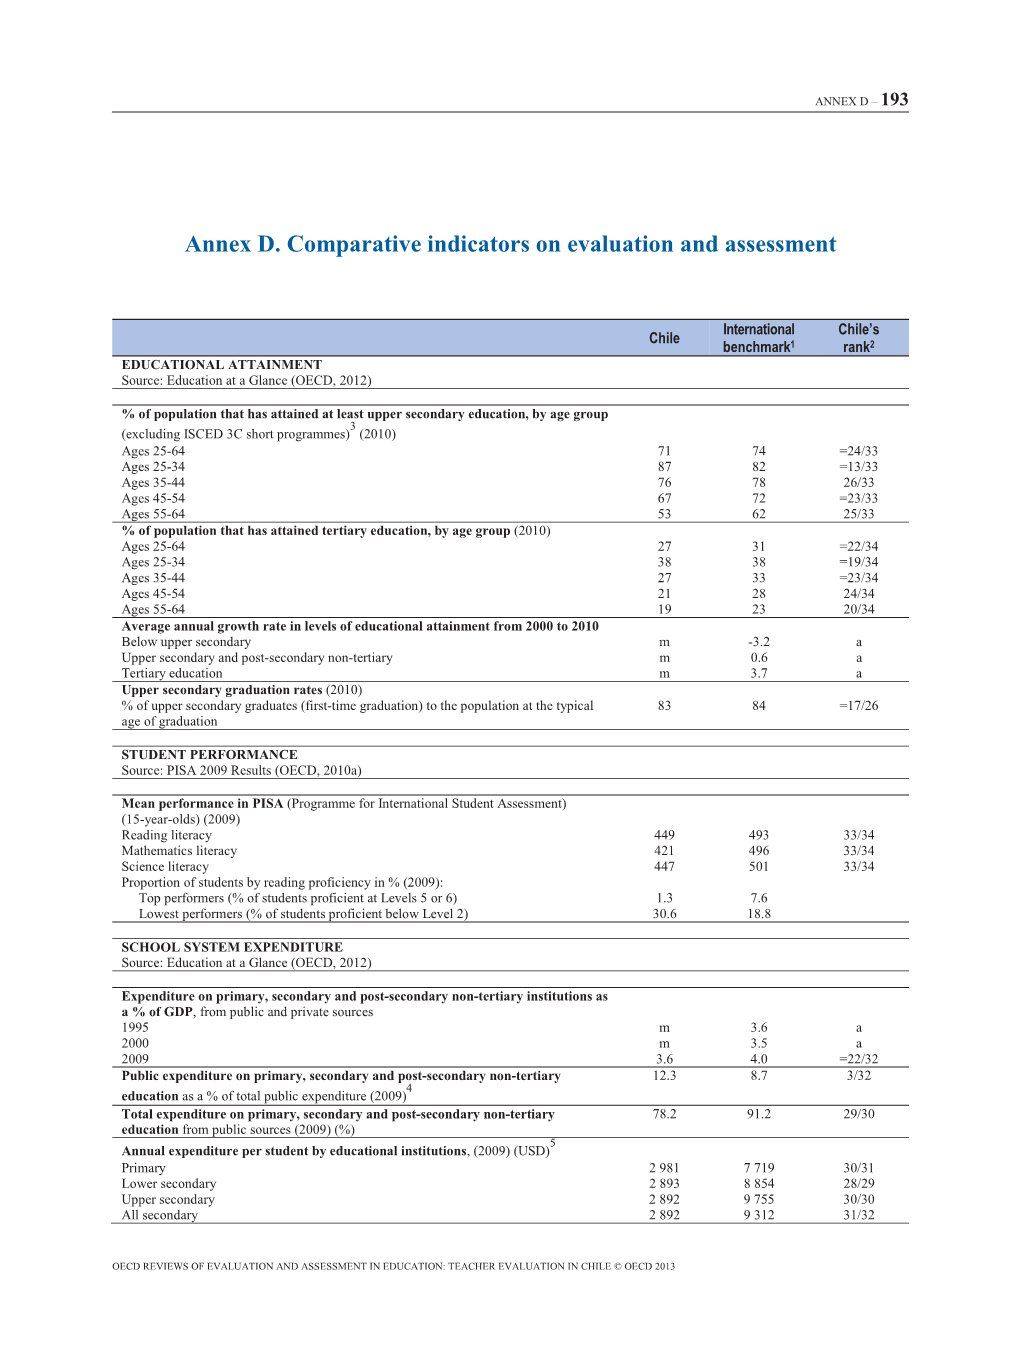 Annex D. Comparative Indicators on Evaluation and Assessment